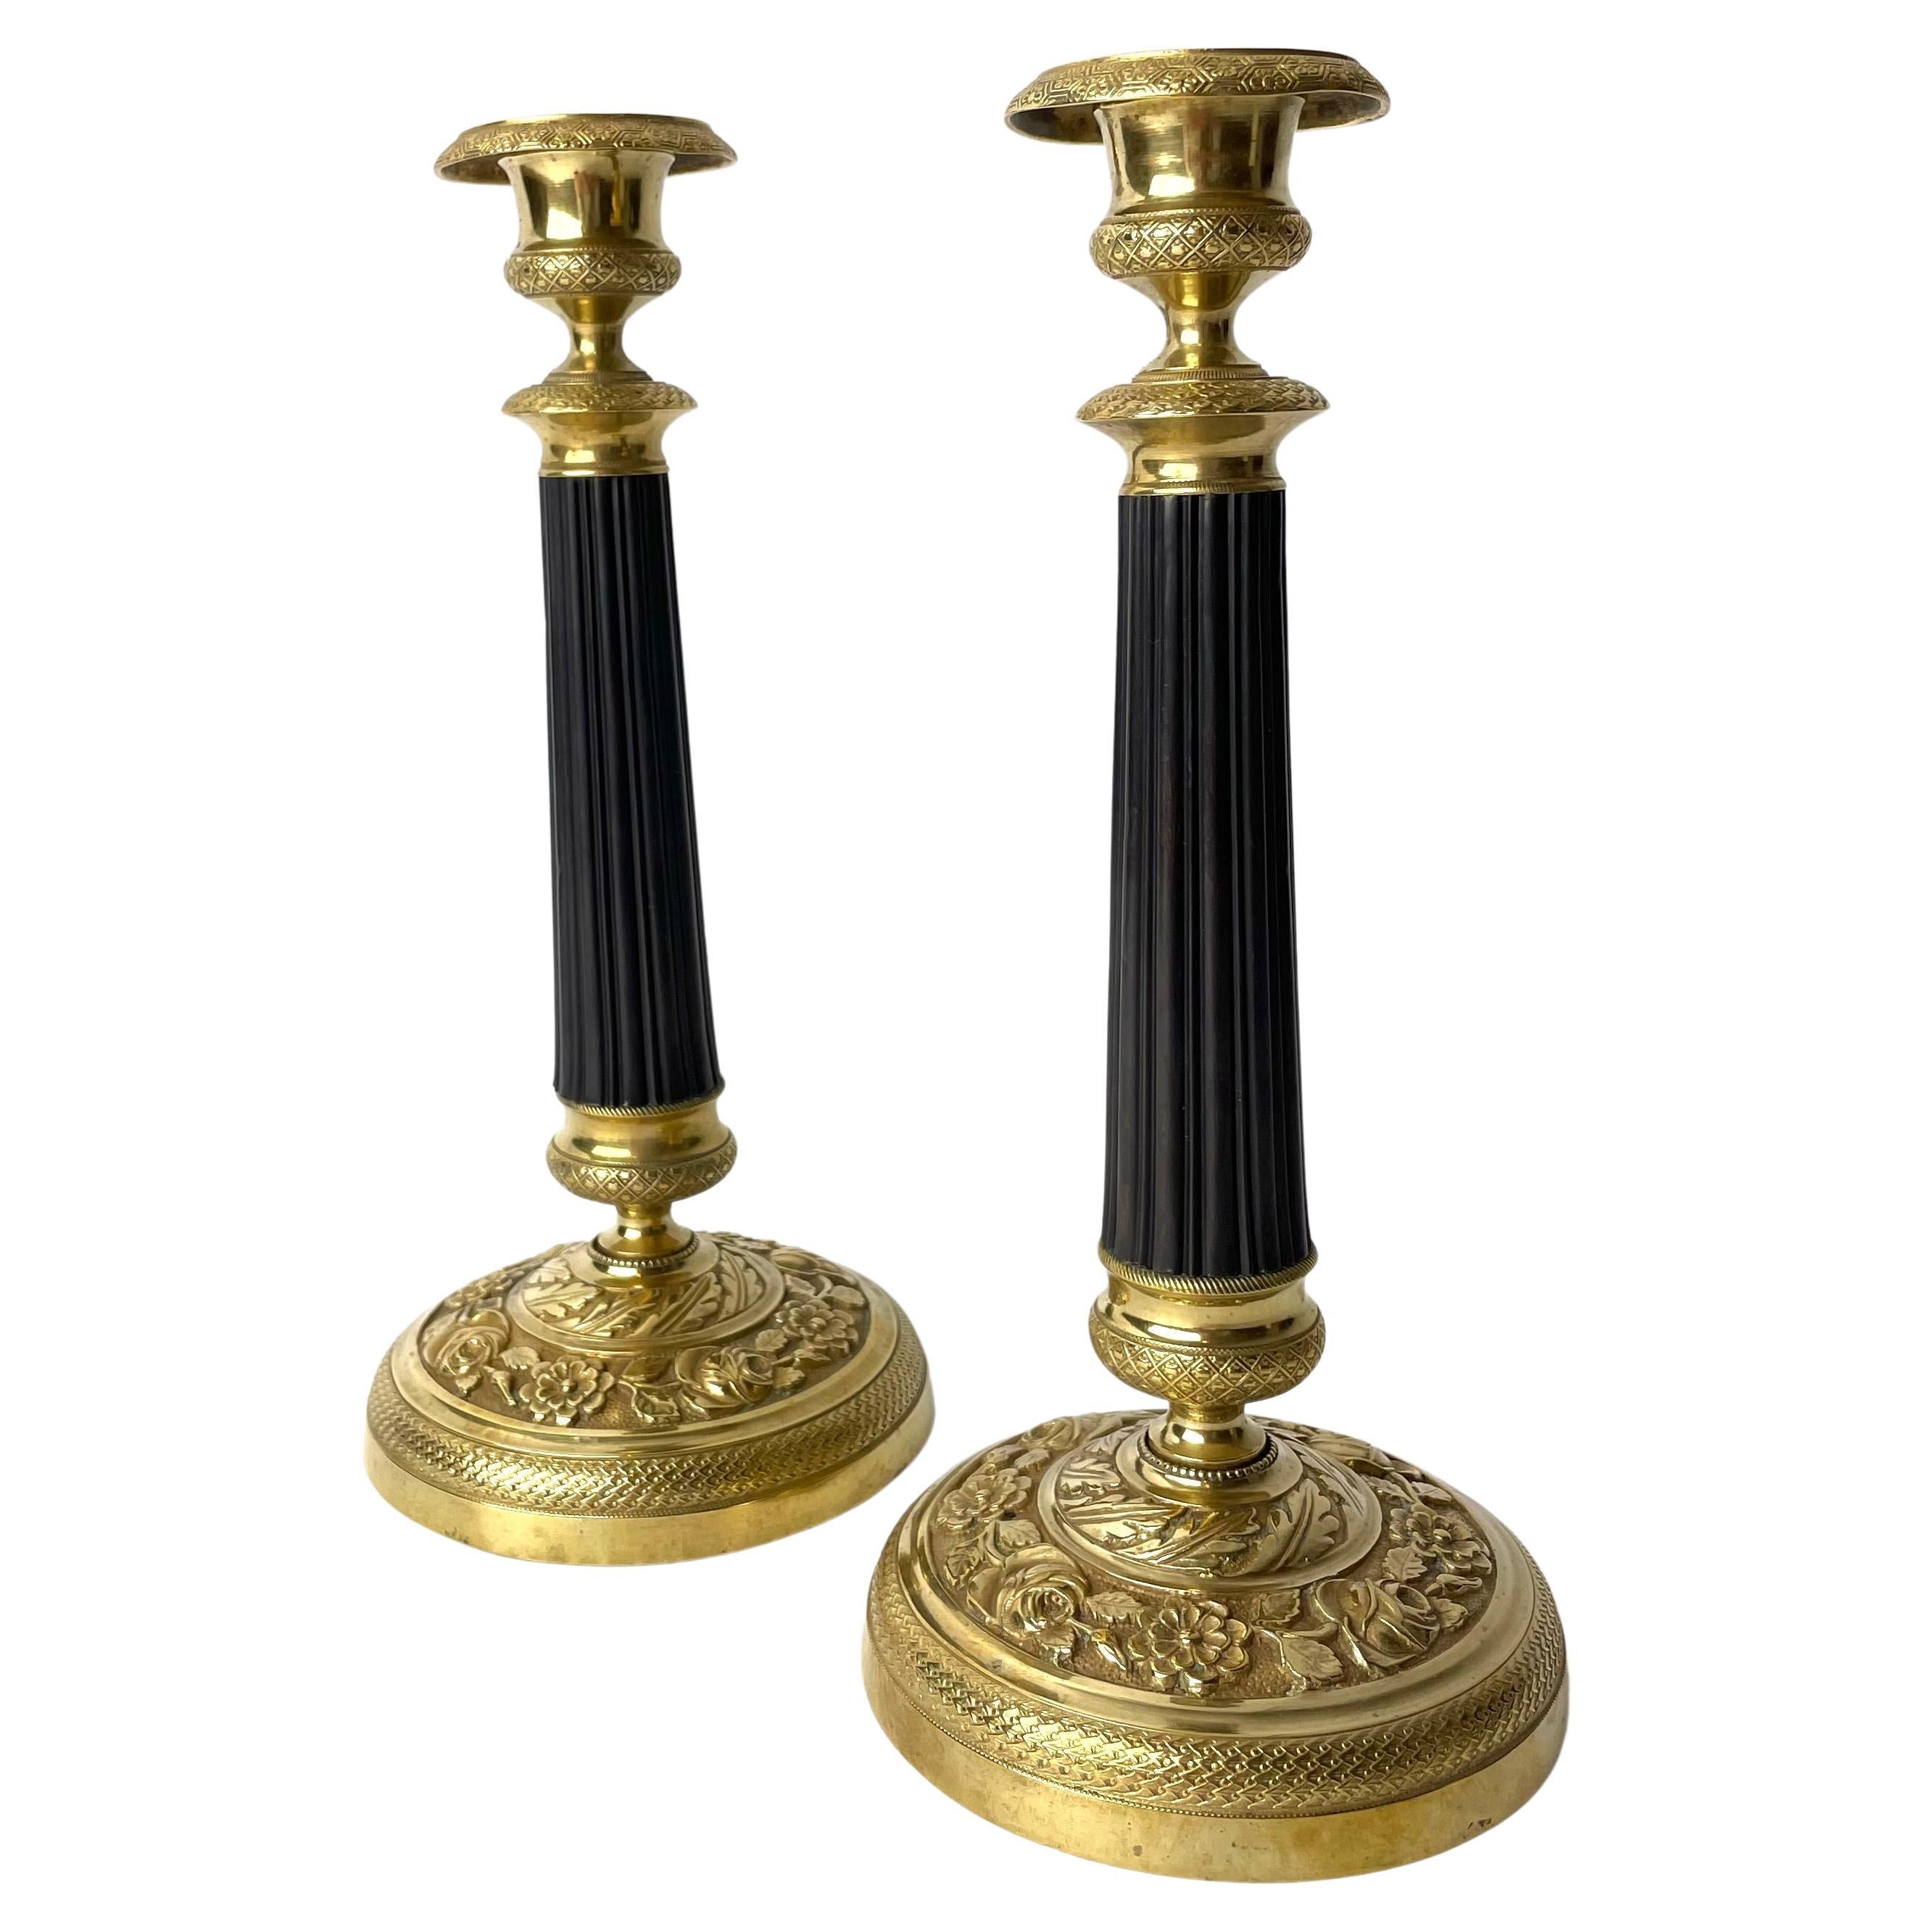 A Pair of Elegant Empire Candlesticks, Gilded and Patinated Brass, 1820s France For Sale